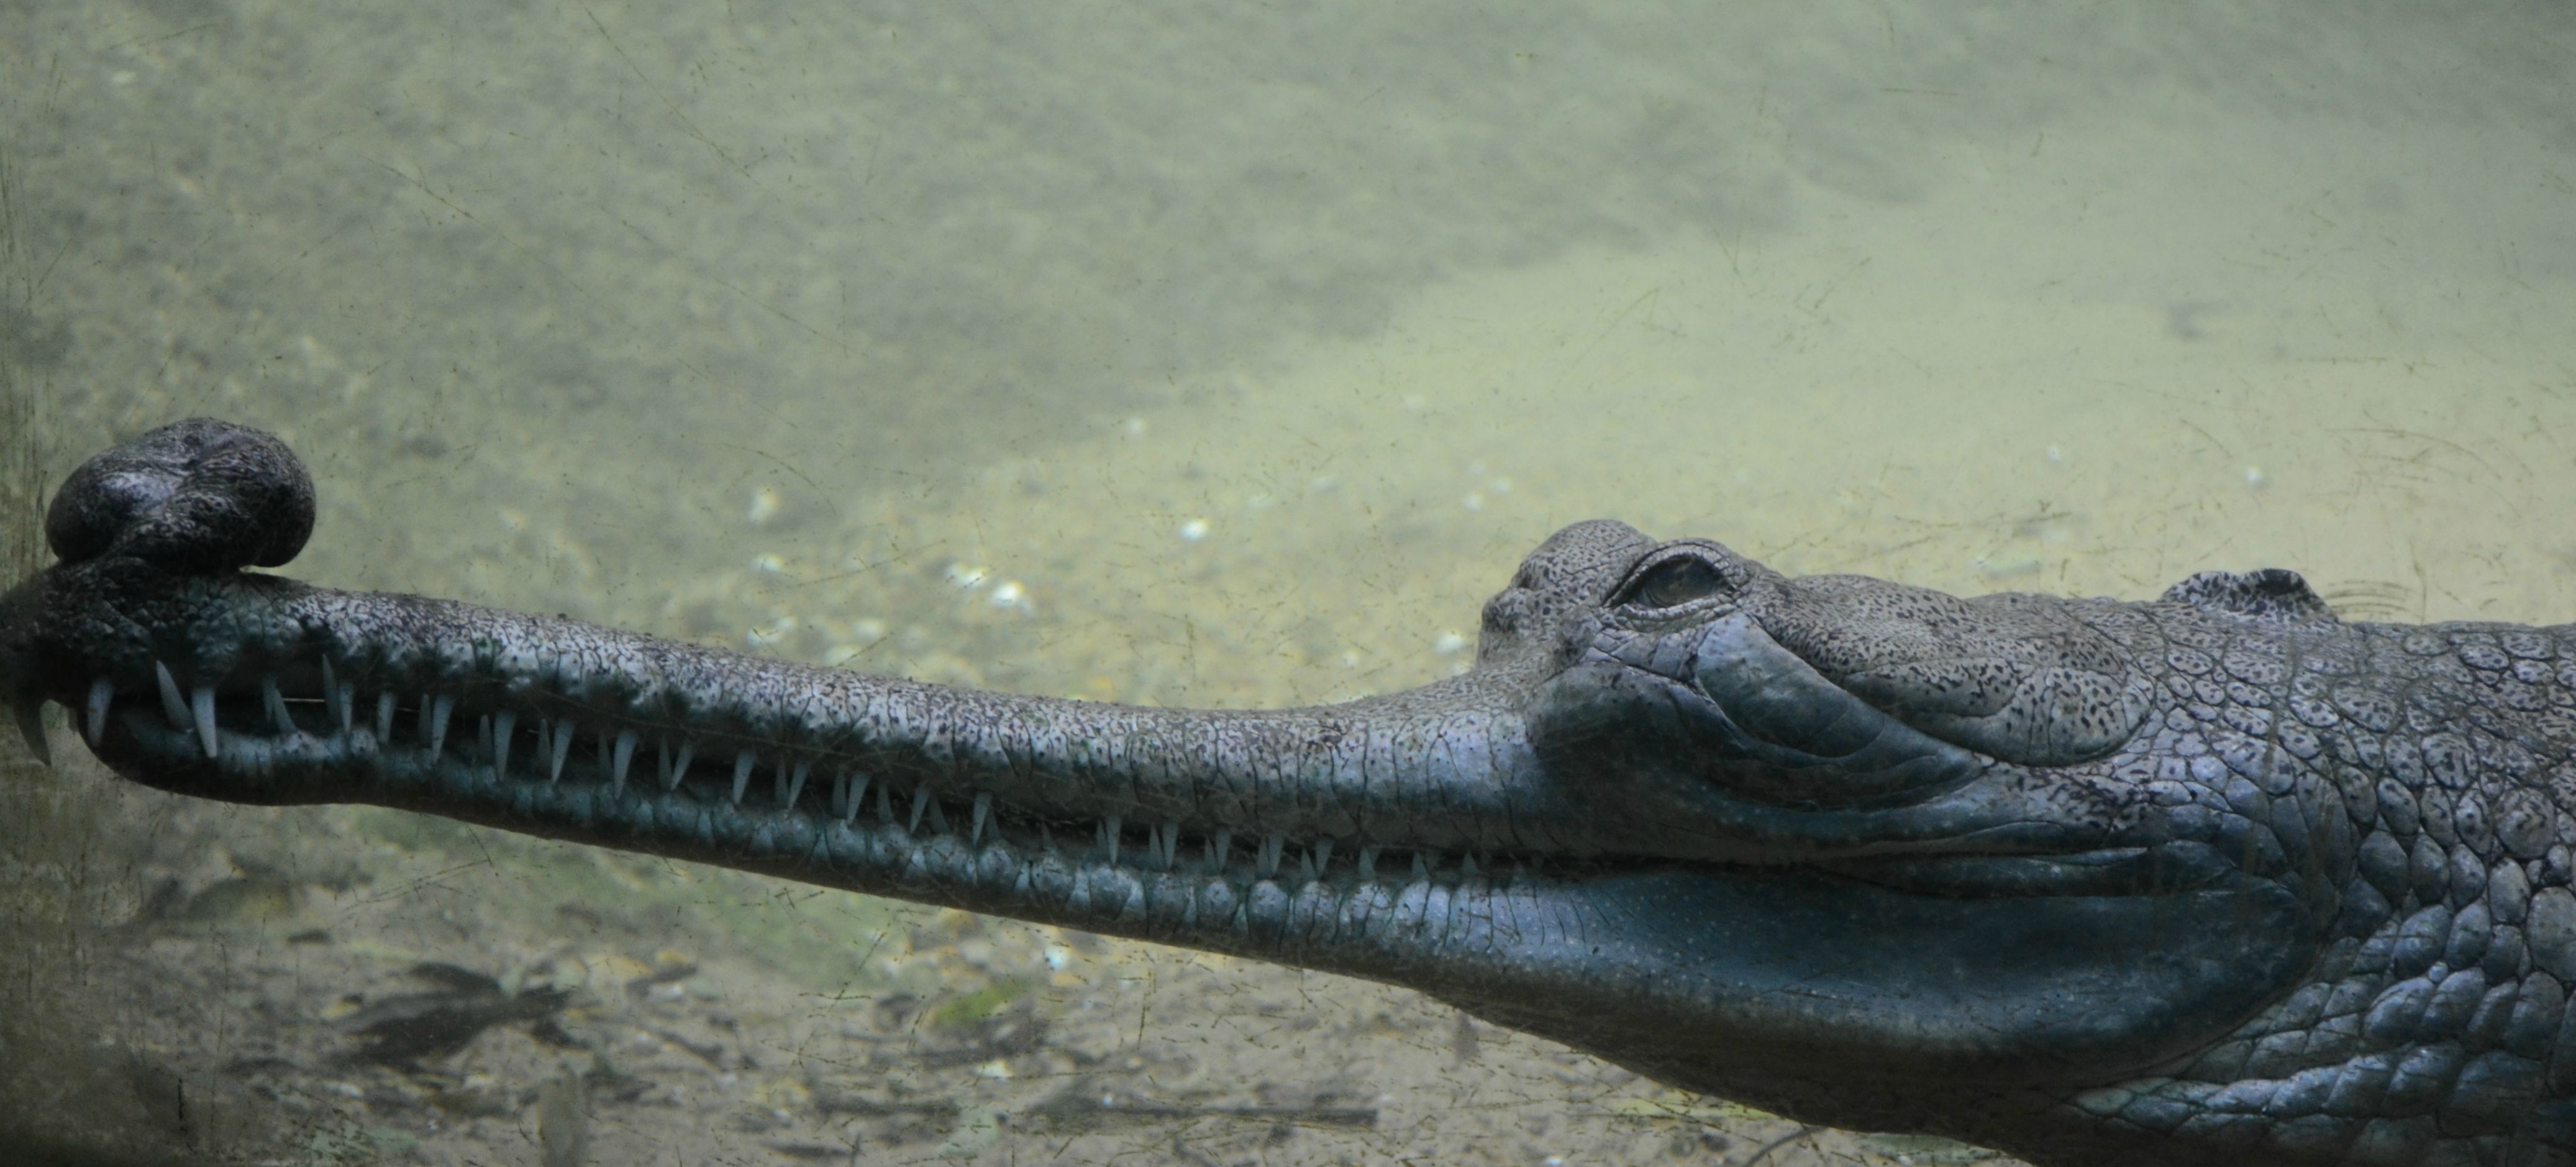 Gharial Pics, Animal Collection